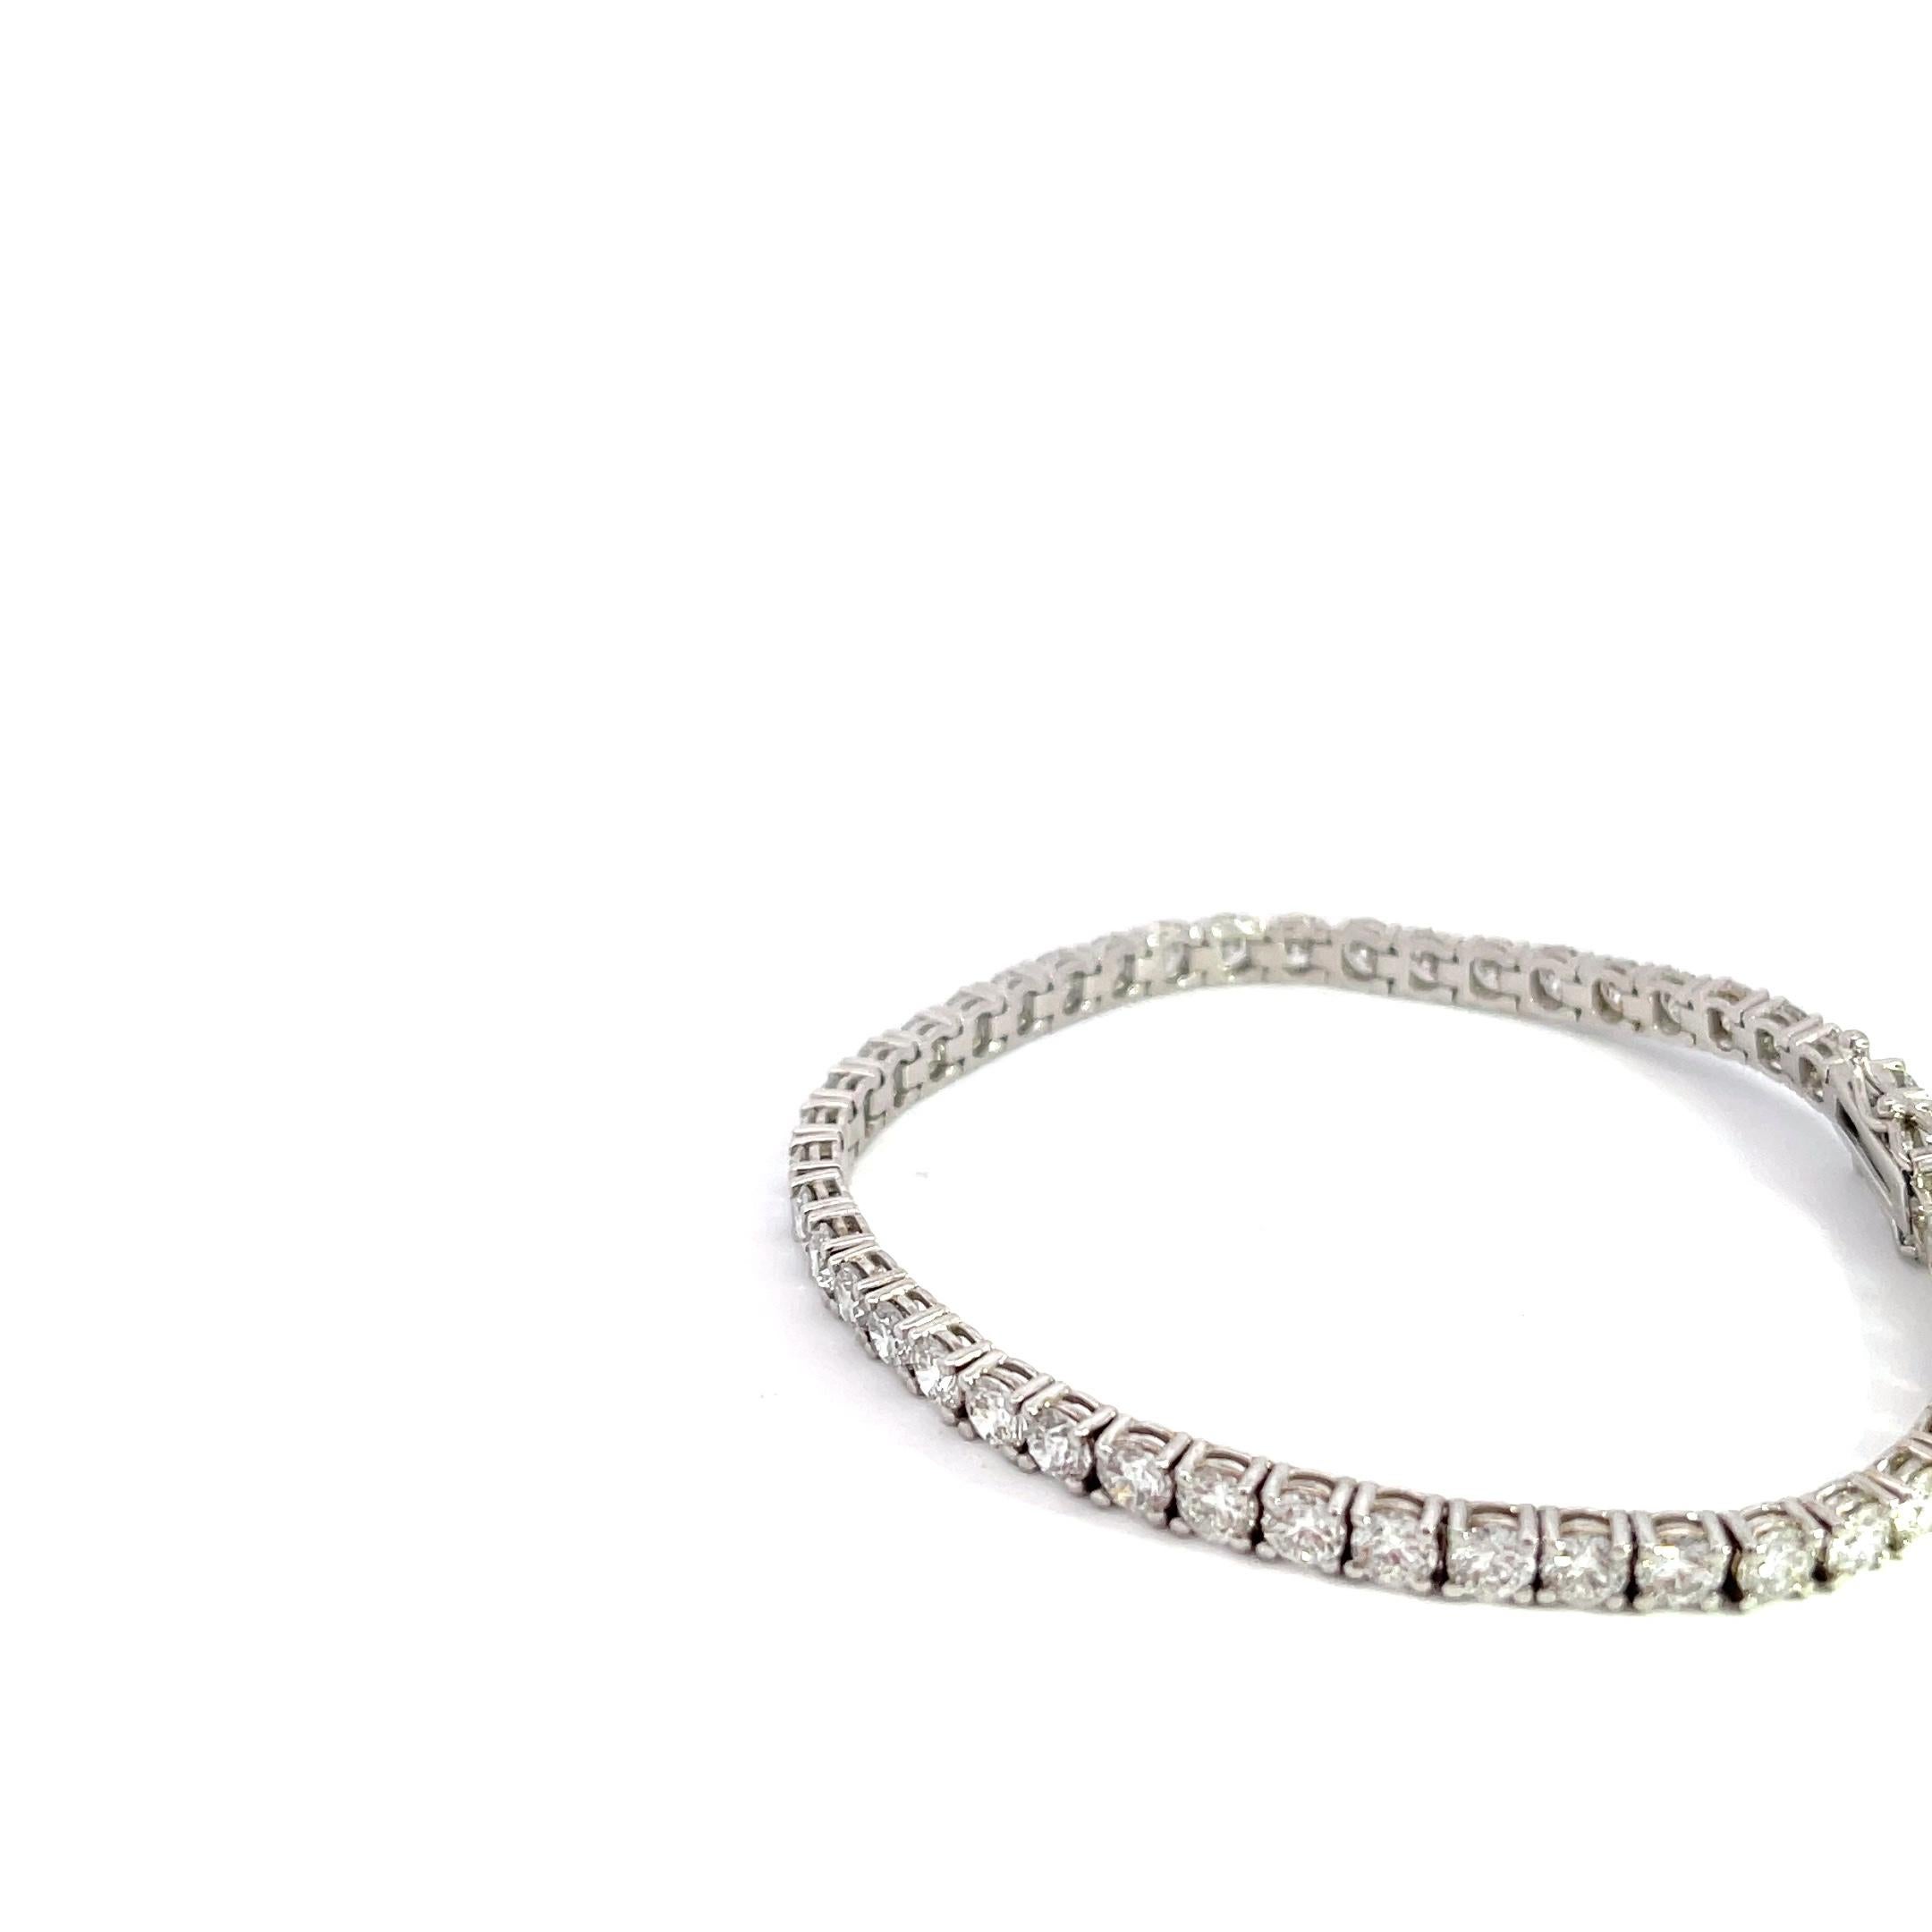 Introducing the exquisite 14k White Gold 16 5/8ctw Diamond Tennis Bracelet, a true symbol of timeless elegance and sophistication. This dazzling masterpiece is a must-have for those seeking to make a stunning statement. Crafted with meticulous